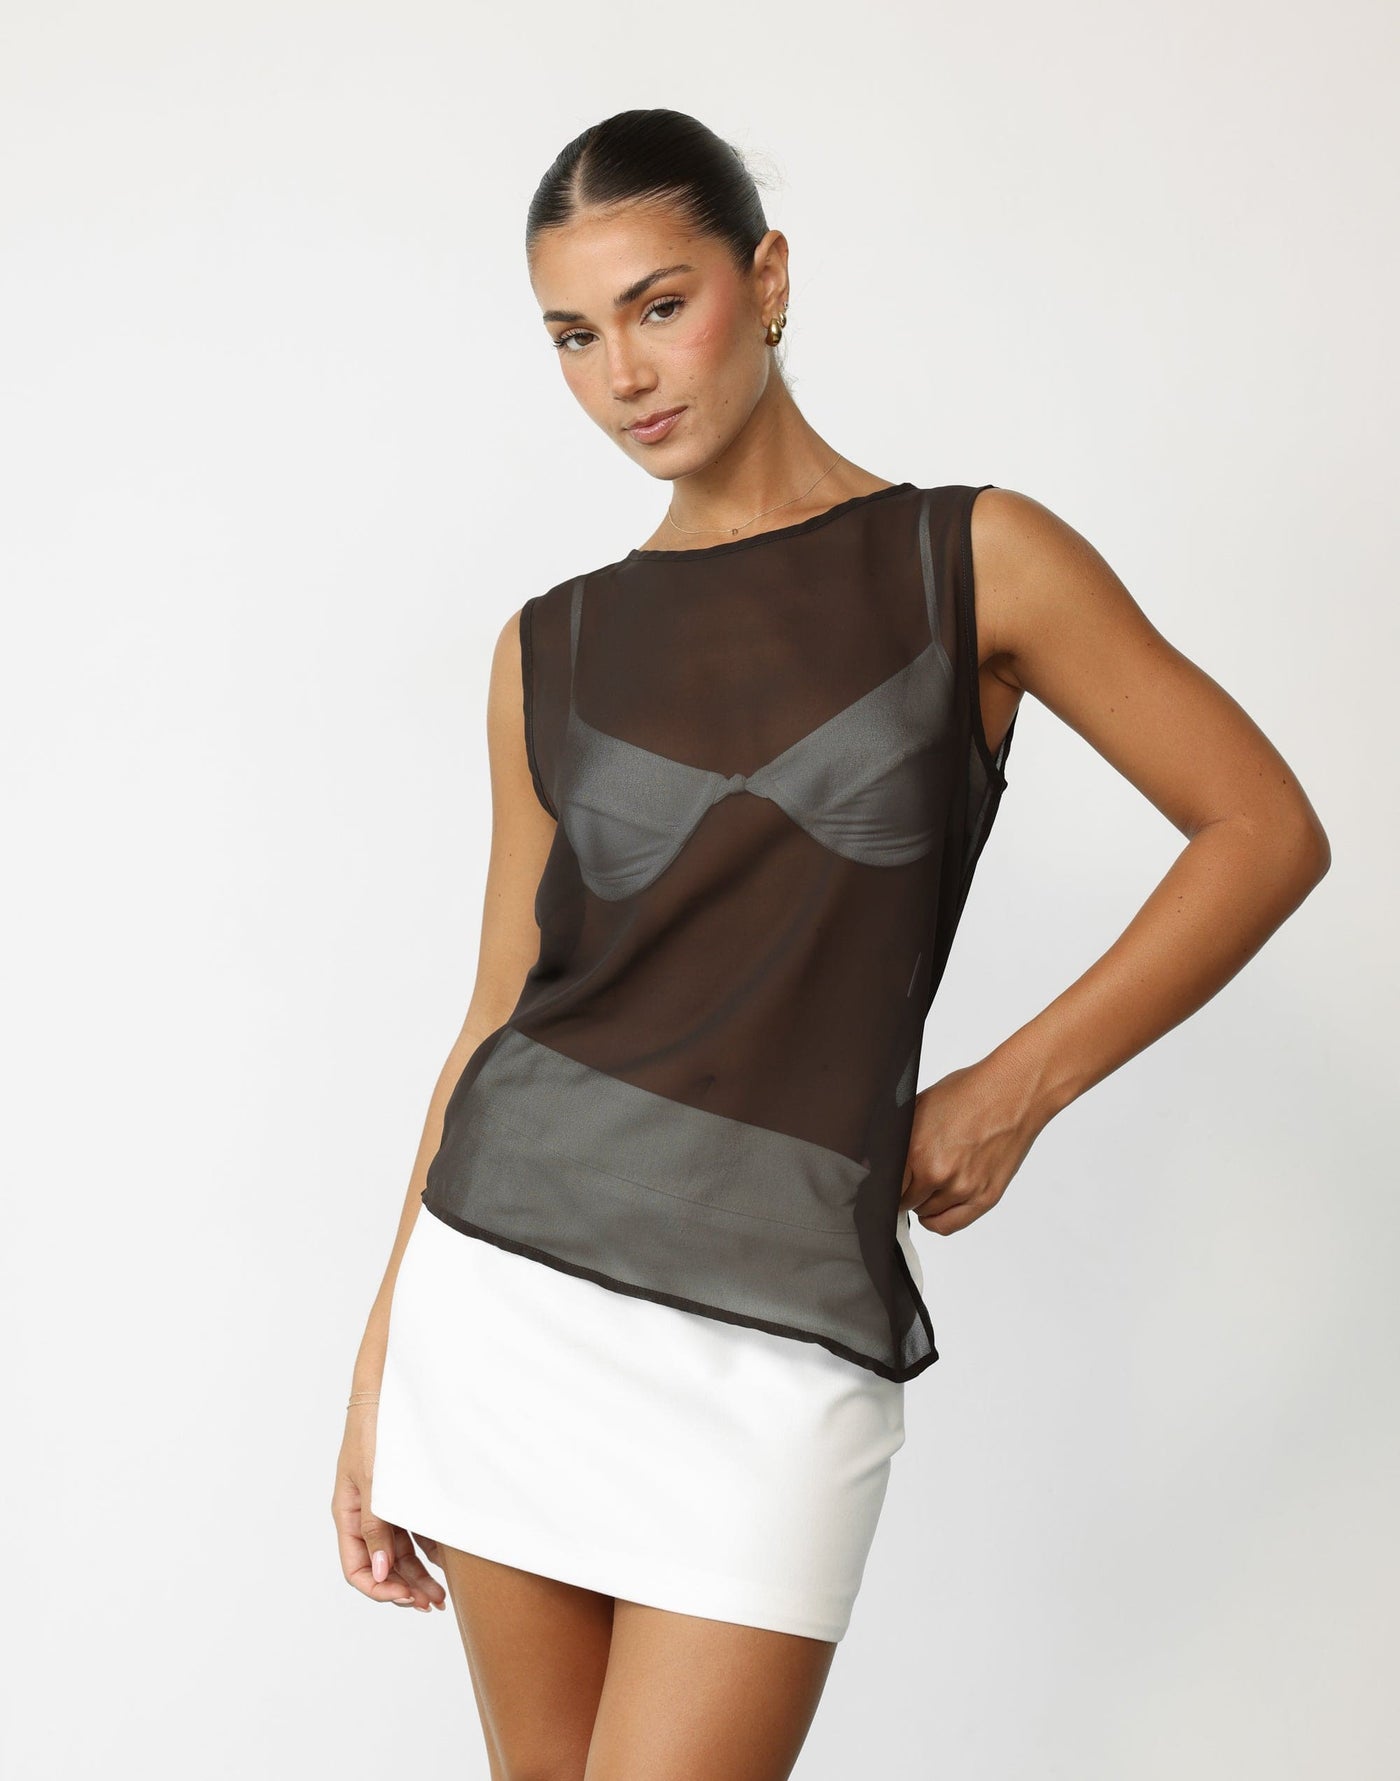 Angelo Top (Chocolate) | CHARCOAL Exclusive - Sheer Asymmetrical Hem Top - Women's Top - Charcoal Clothing